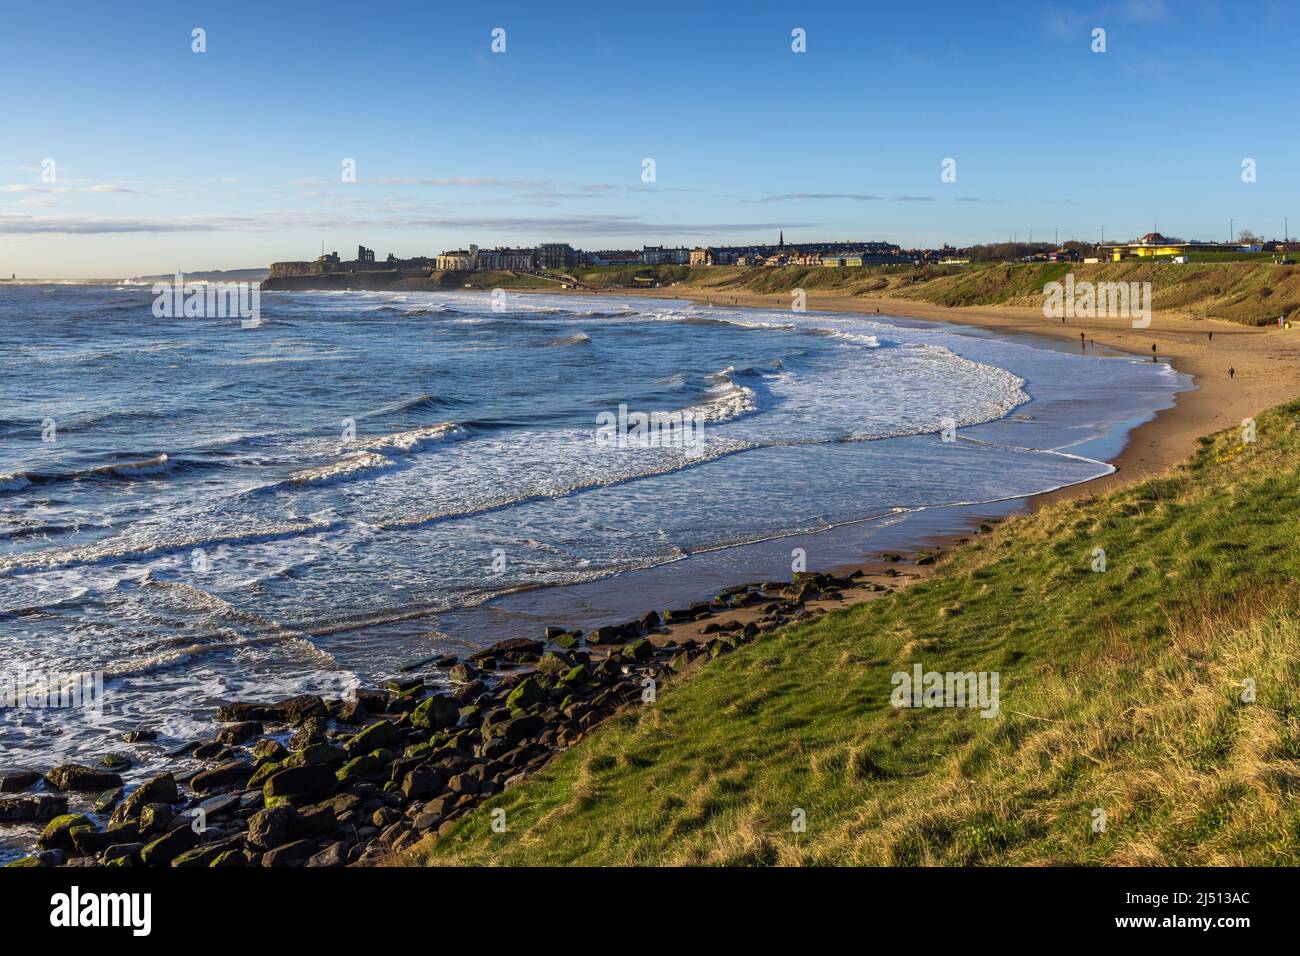 Long Sands beach at Tynemouth on a early spring morning, with Tynemouth Castle and Priory in the distance, Tyne and Wear. Stock Photo